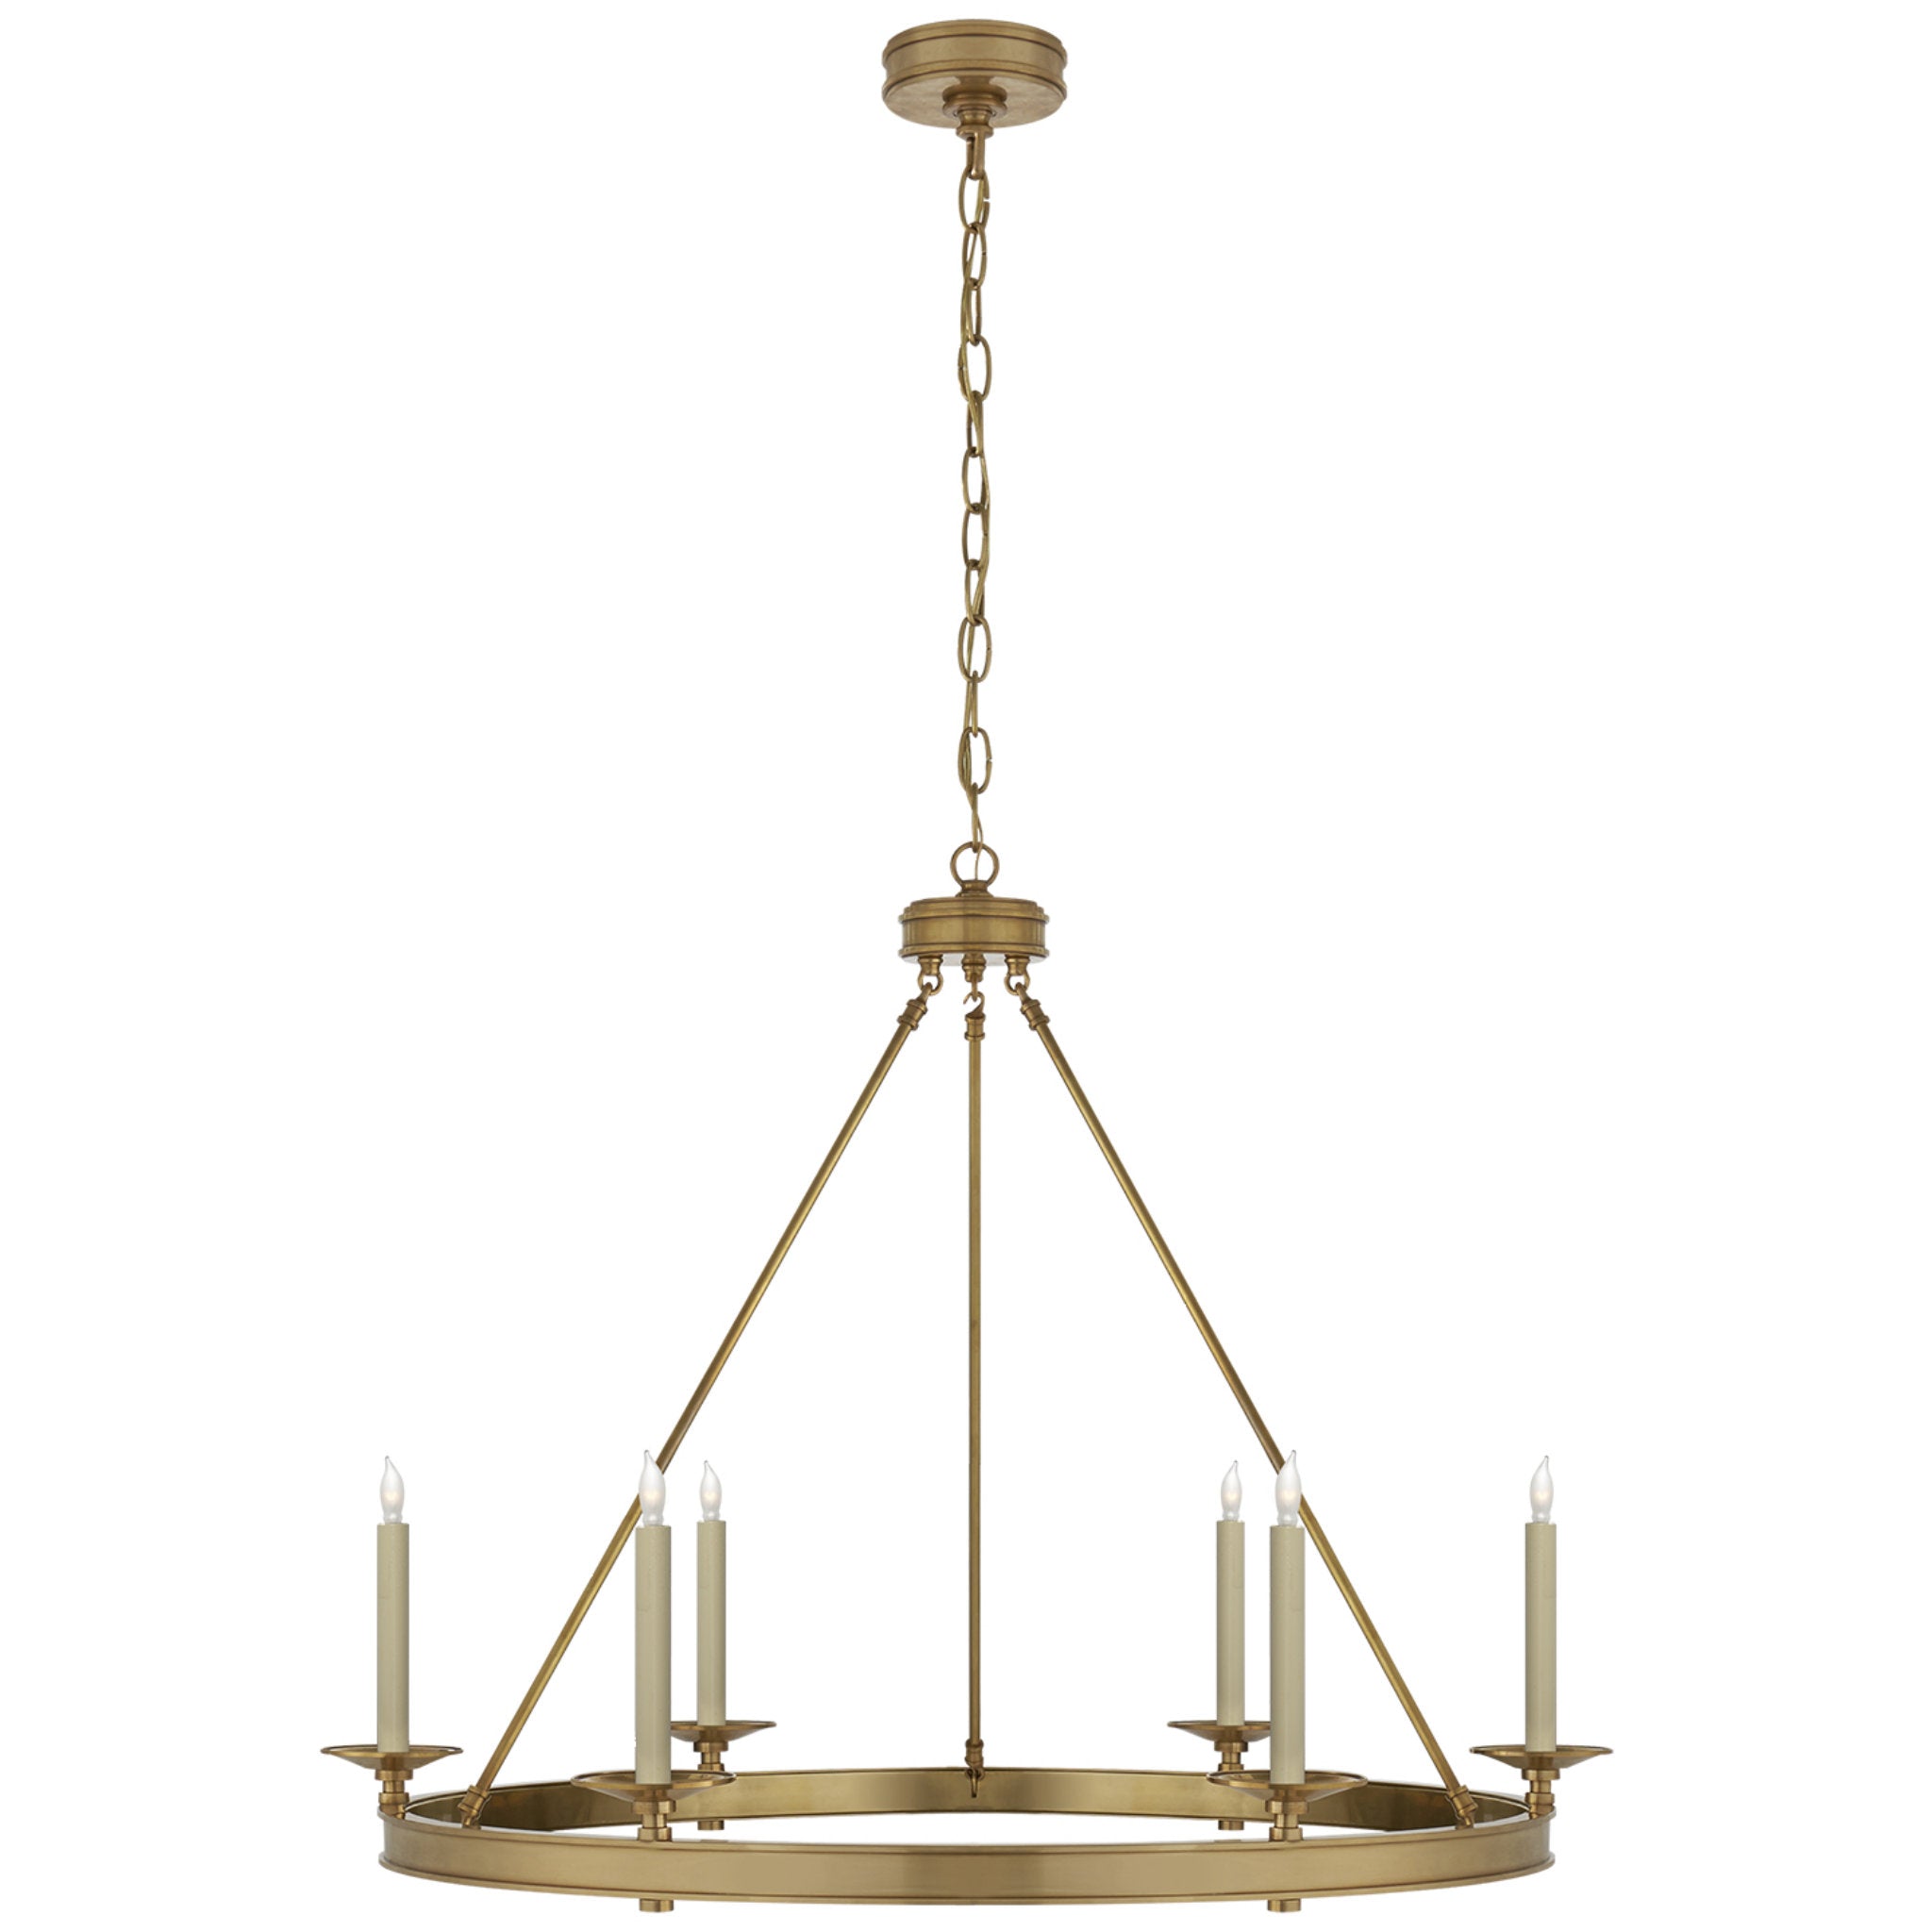 Chapman & Myers Launceton Ring Chandelier in Antique-Burnished Brass